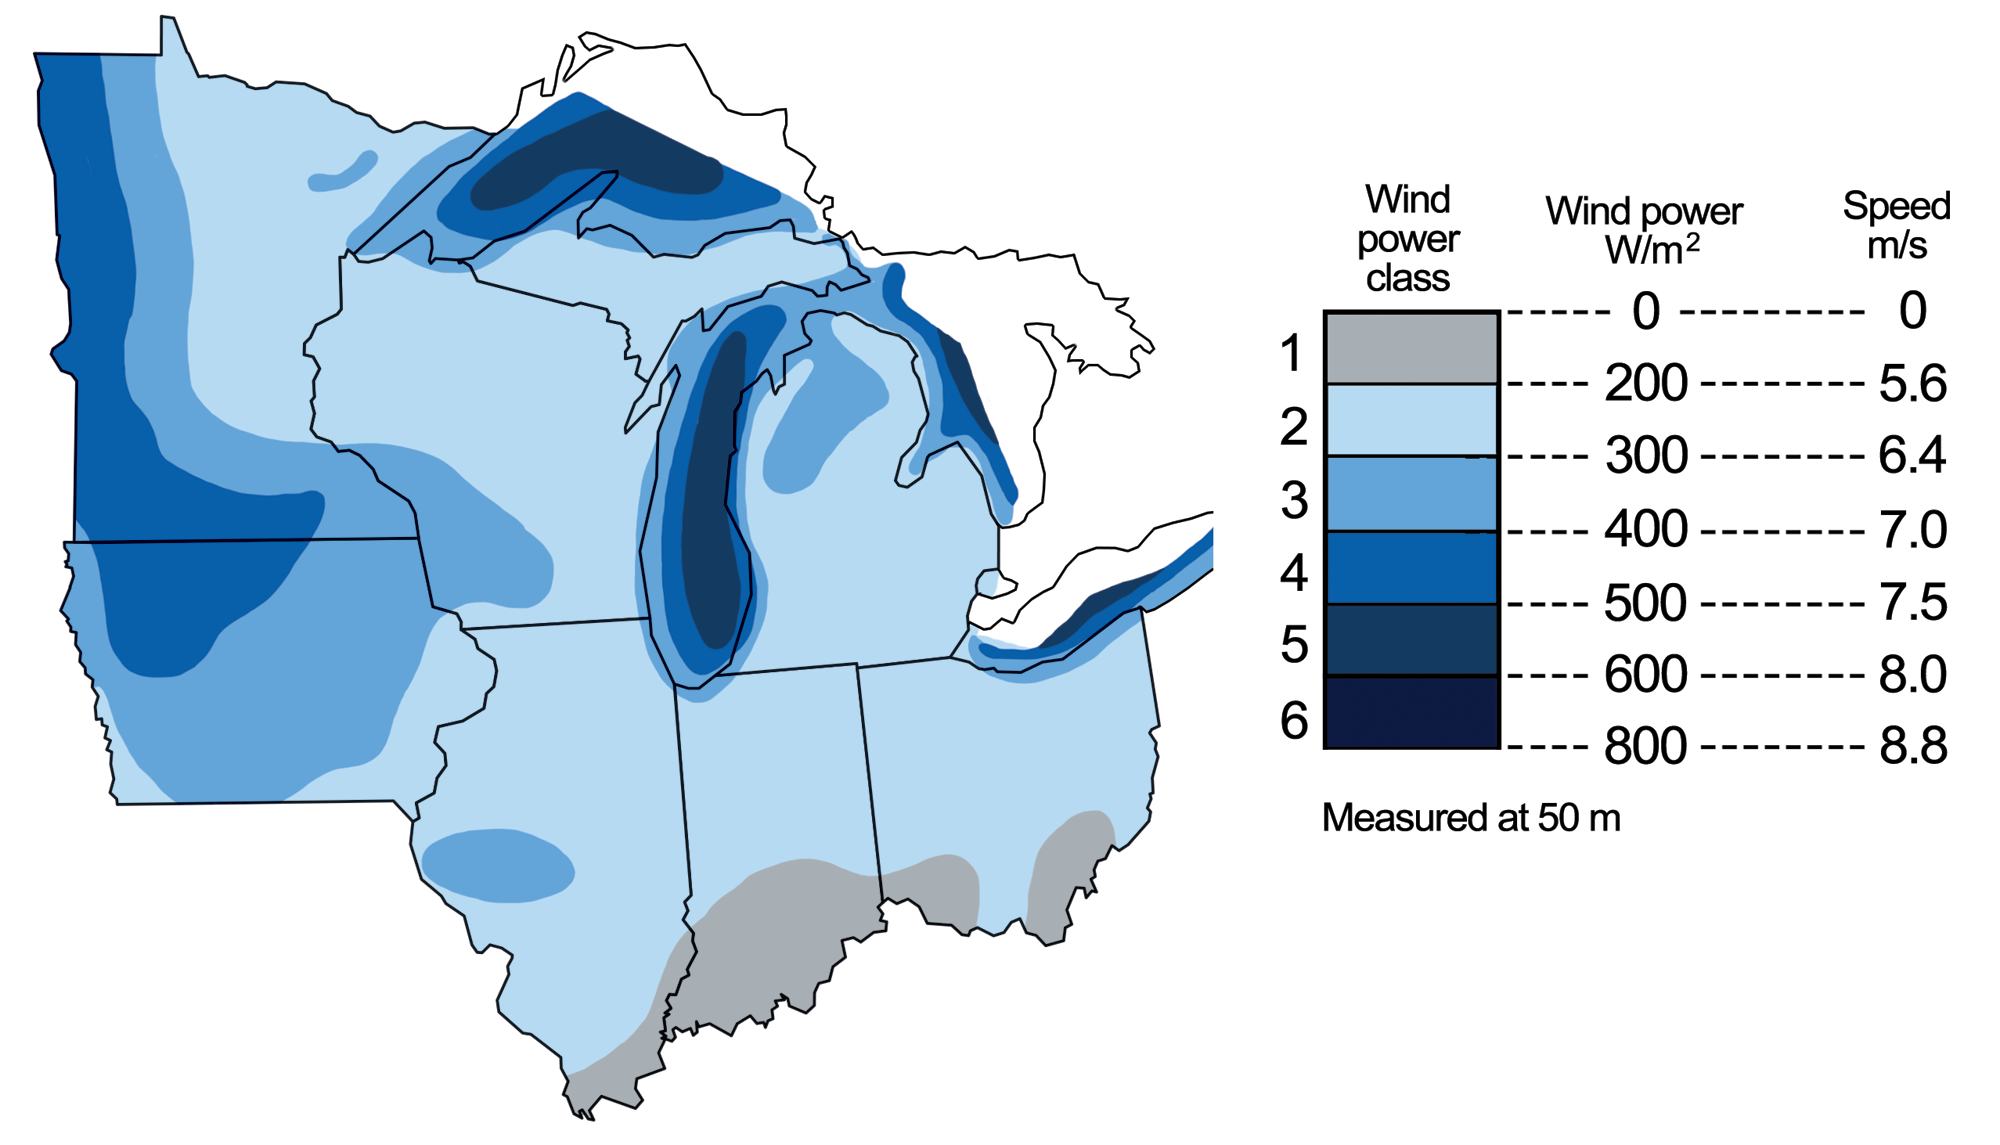 Map of the midwestern United States with state borders outlined in black. Wind energy potential is indicated by blue and gray shading. The darkest blue indicates the greatest potential, whereas the gray indicates the least potential. Areas with the most potential are in the Great Lakes. On land, the greatest potential is in western Minnesota and northwestern to north-central Iowa, although these areas have less wind energy potential than the Great Lakes. Southern Illinois, Indiana, and Ohio are particularly energy poor.